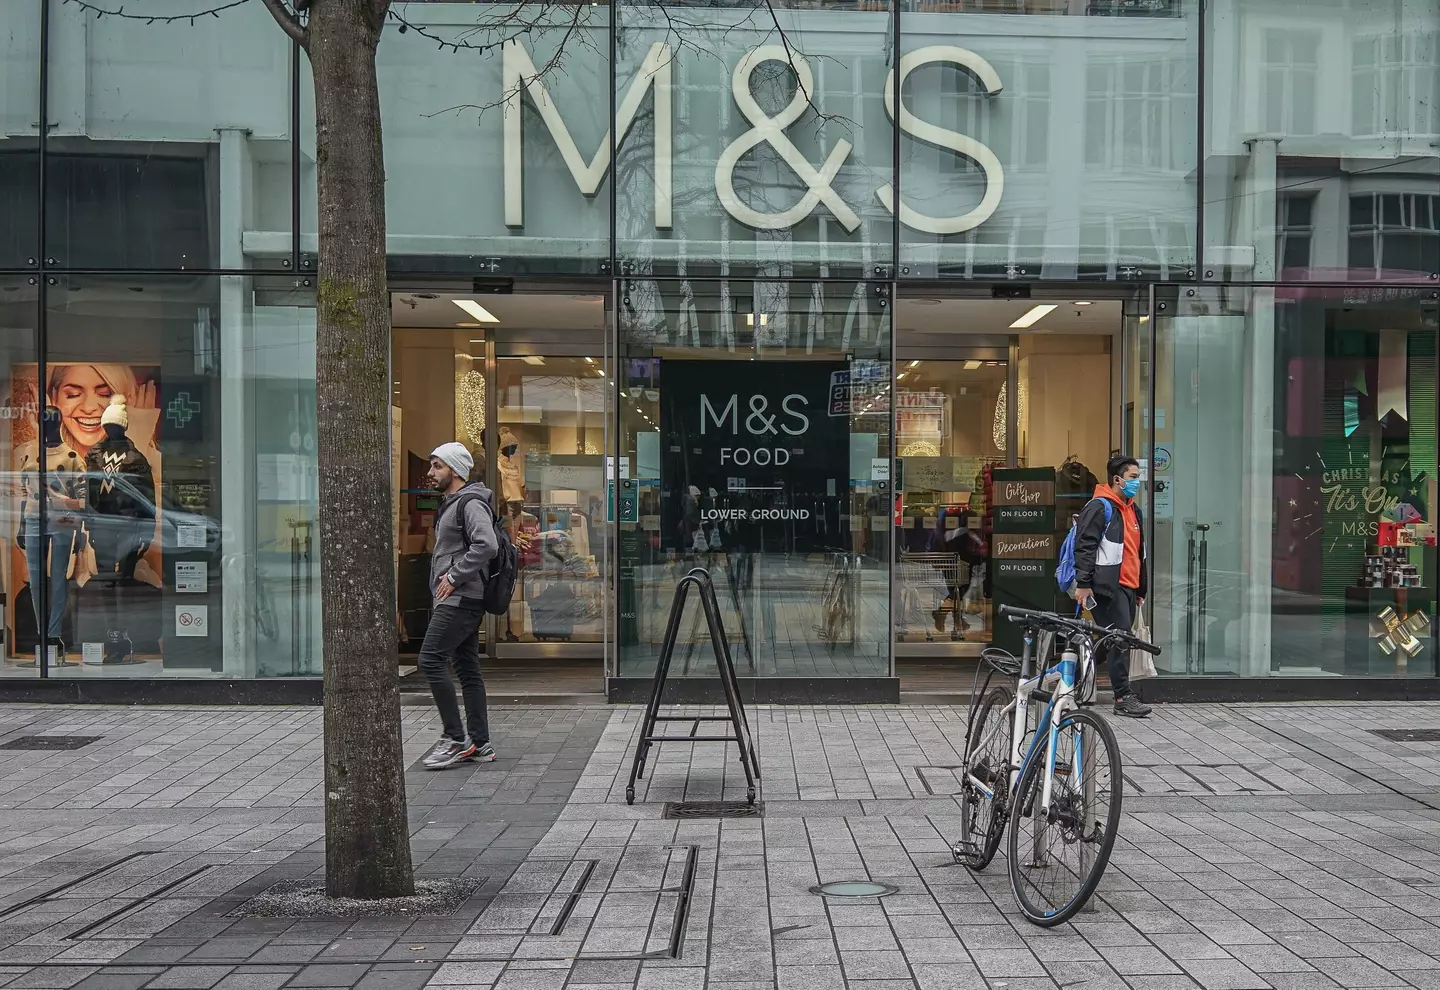 It triggered heavy criticism from M&S' followers.